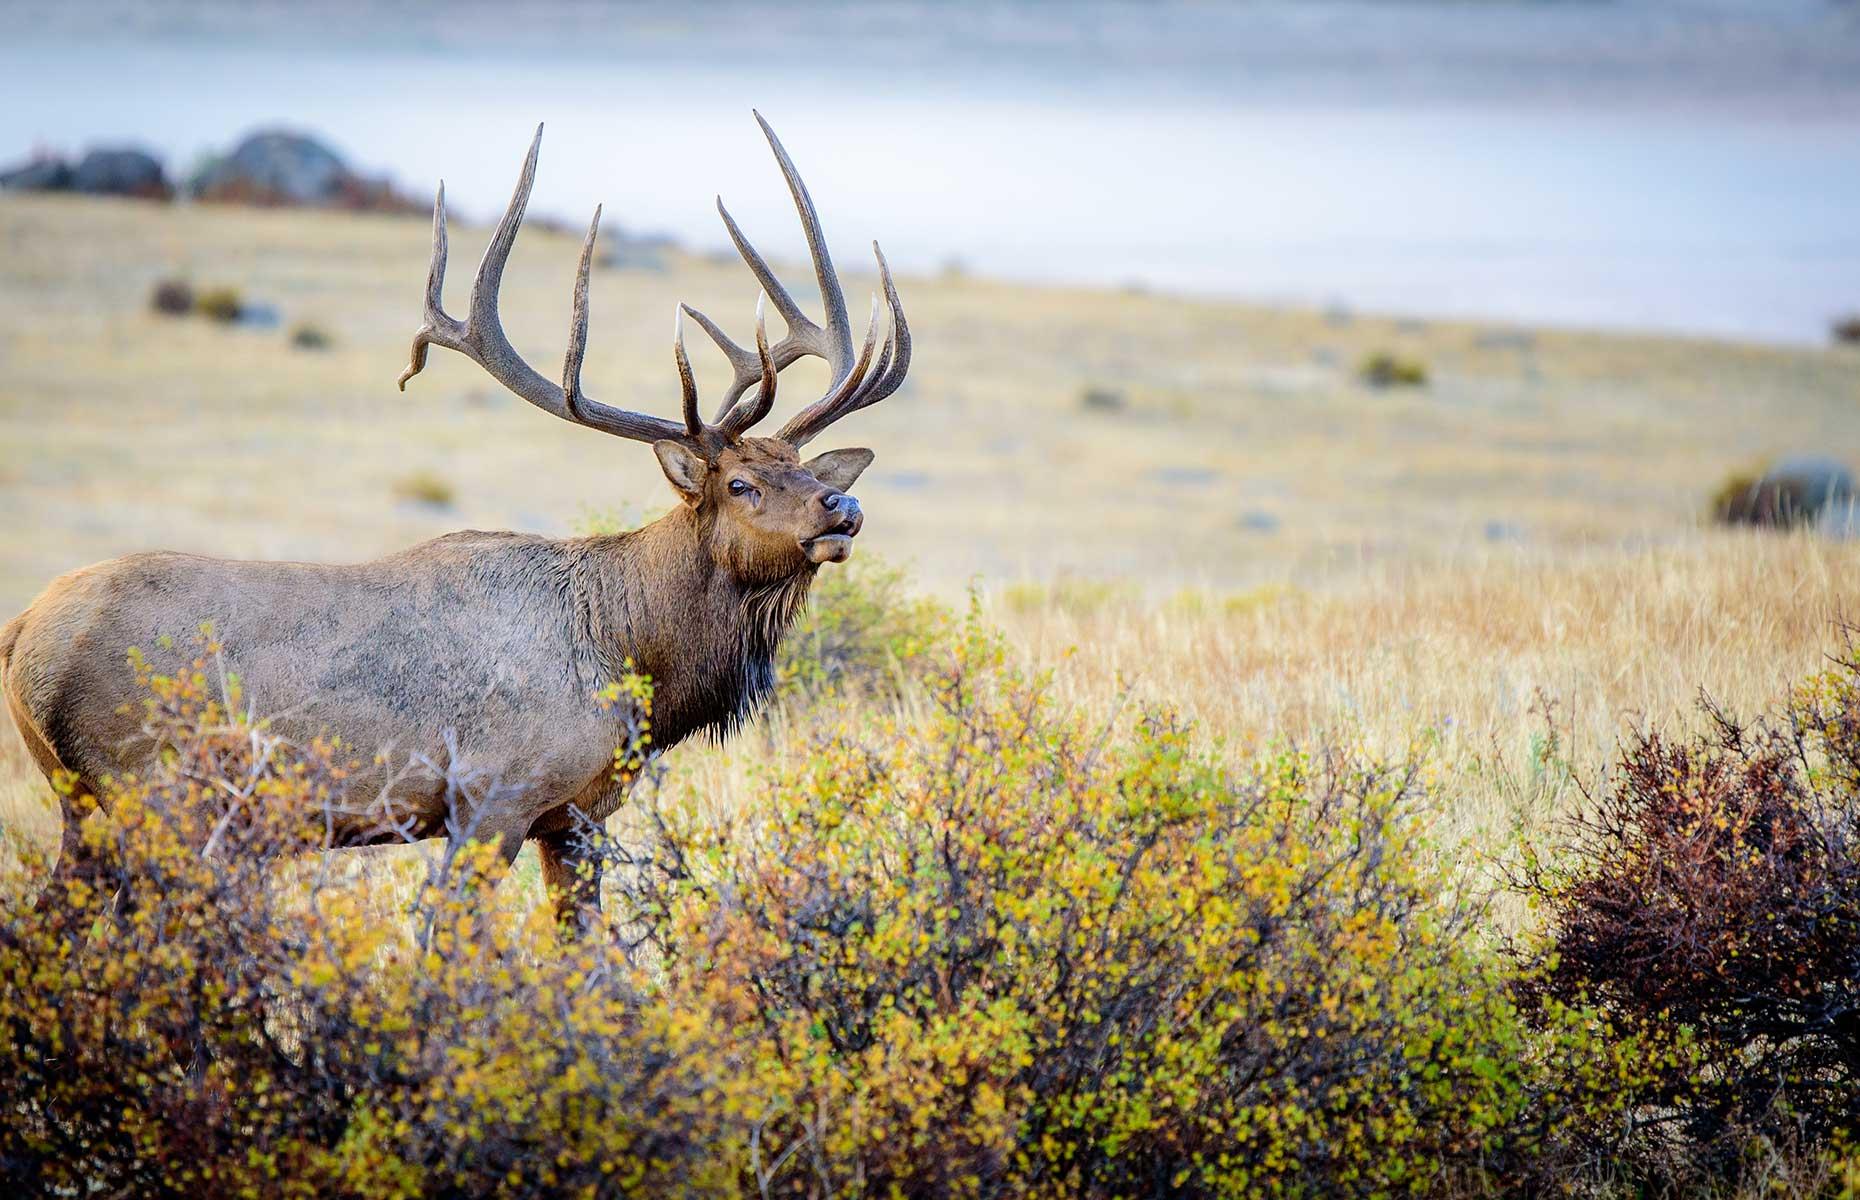 <p>One badly behaved photographer got too close to a bull elk, which already sounds terrifying enough, but he made the mistake during mating season – when the creatures are (understandably) more territorial. <a href="https://petapixel.com/2022/10/14/bull-elk-charges-at-photographer-in-colorado-park-during-mating-season/">The photographer narrowly avoided being hit</a> as the elk charged at him in Estes Park, Colorado, at the base of the Rocky Mountains. One witness said he had made noises to try and get a response from the elk. The US National Park Service warns visitors to keep a comfortable distance from the wild animals.</p>  <p><a href="https://www.loveexploring.com/gallerylist/116491/what-your-favourite-destinations-looked-like-before-tourism"><strong>Now see what your favorite destinations looked like before tourism</strong></a></p>